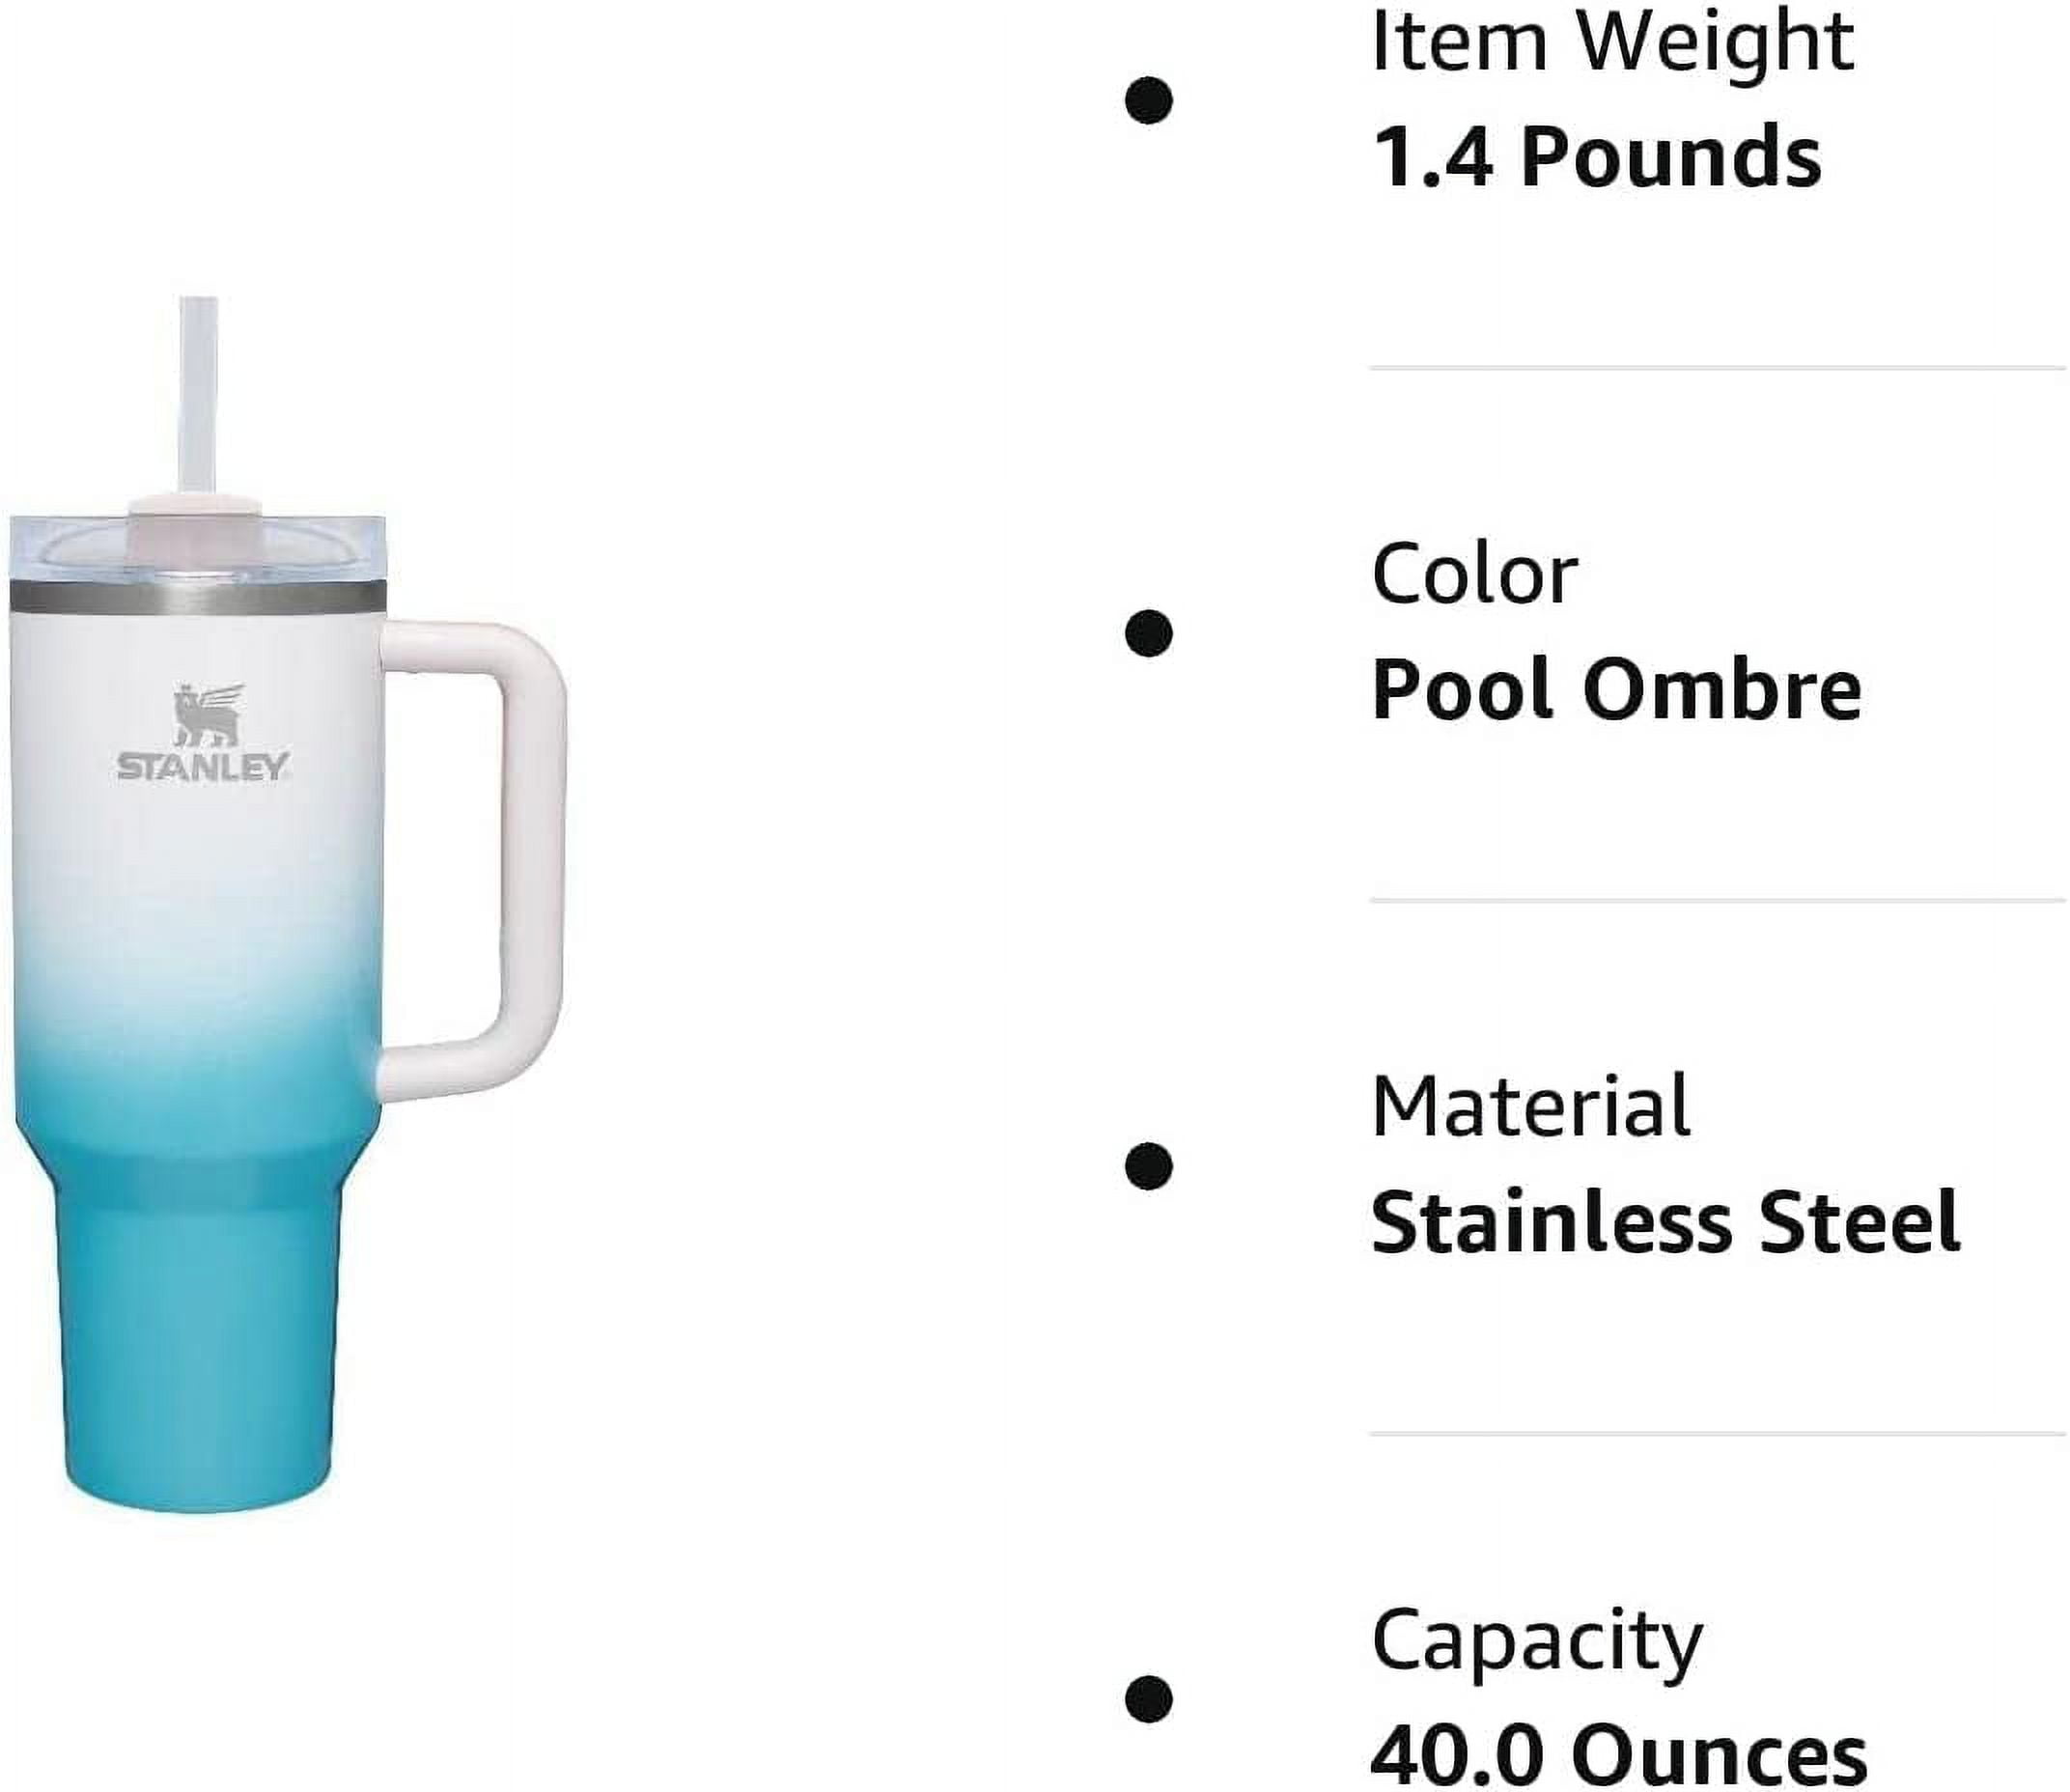 Stanley Quencher H2.0 Flowstate 40oz Tumbler Blue Blush Pool Ombre NEW